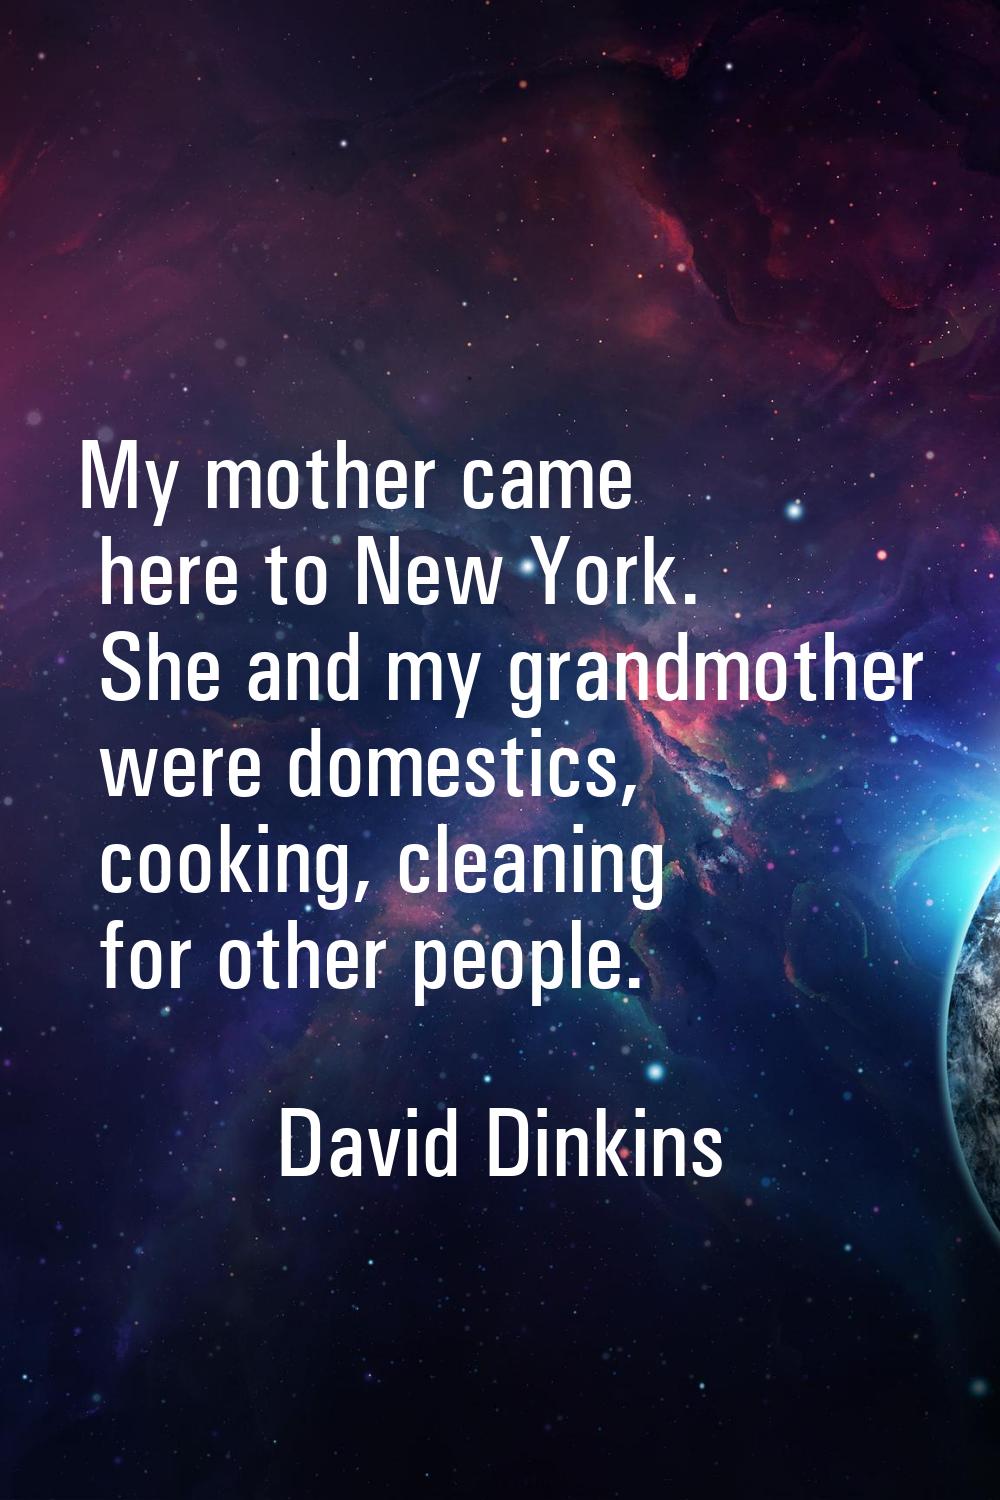 My mother came here to New York. She and my grandmother were domestics, cooking, cleaning for other